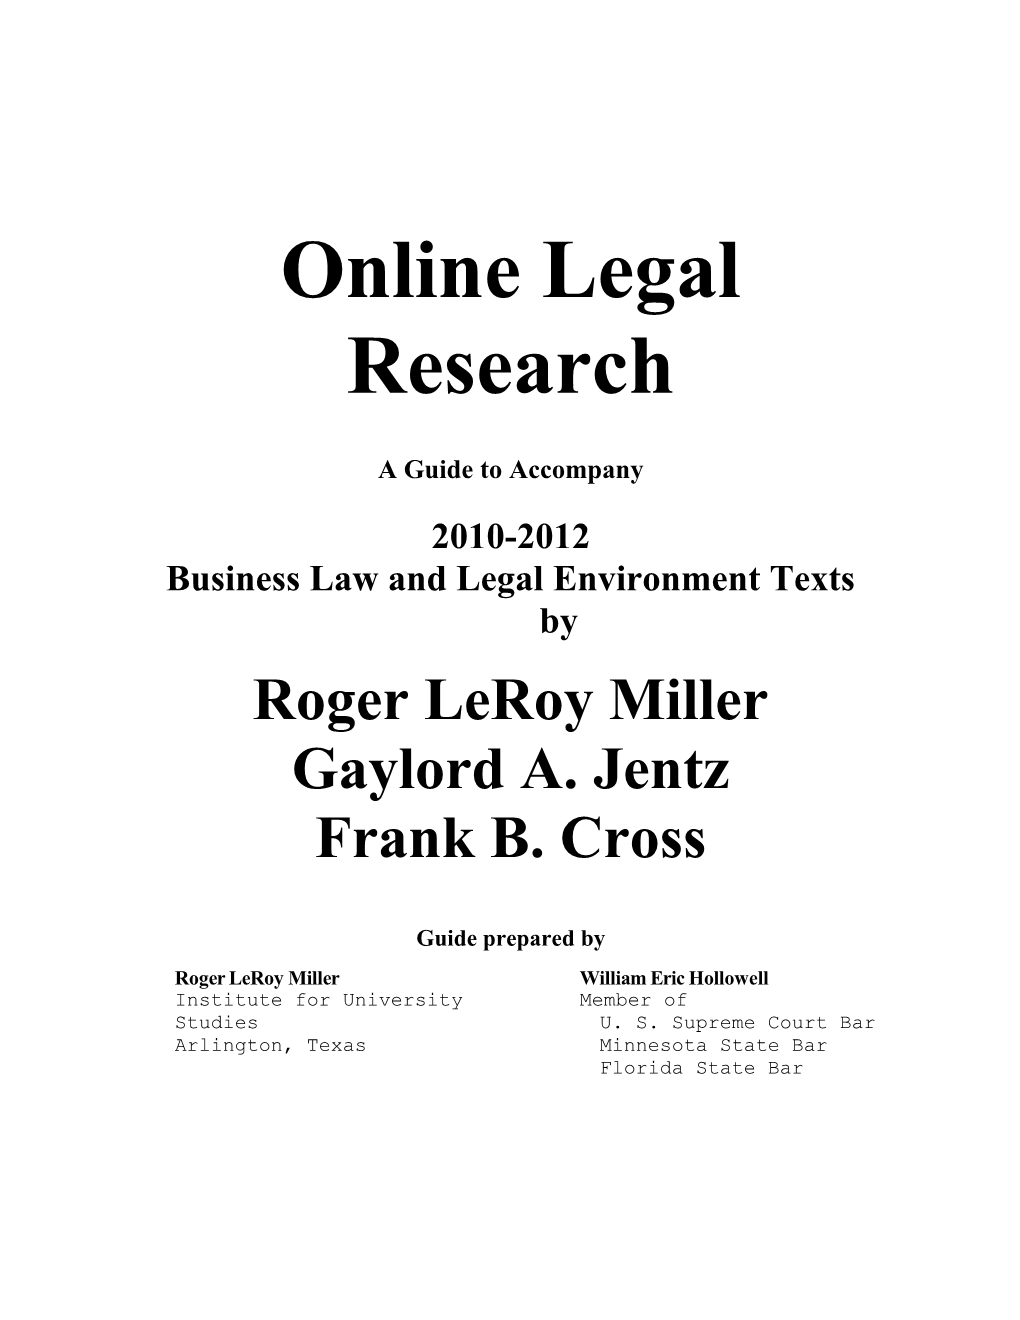 Business Law and Legal Environment Texts By